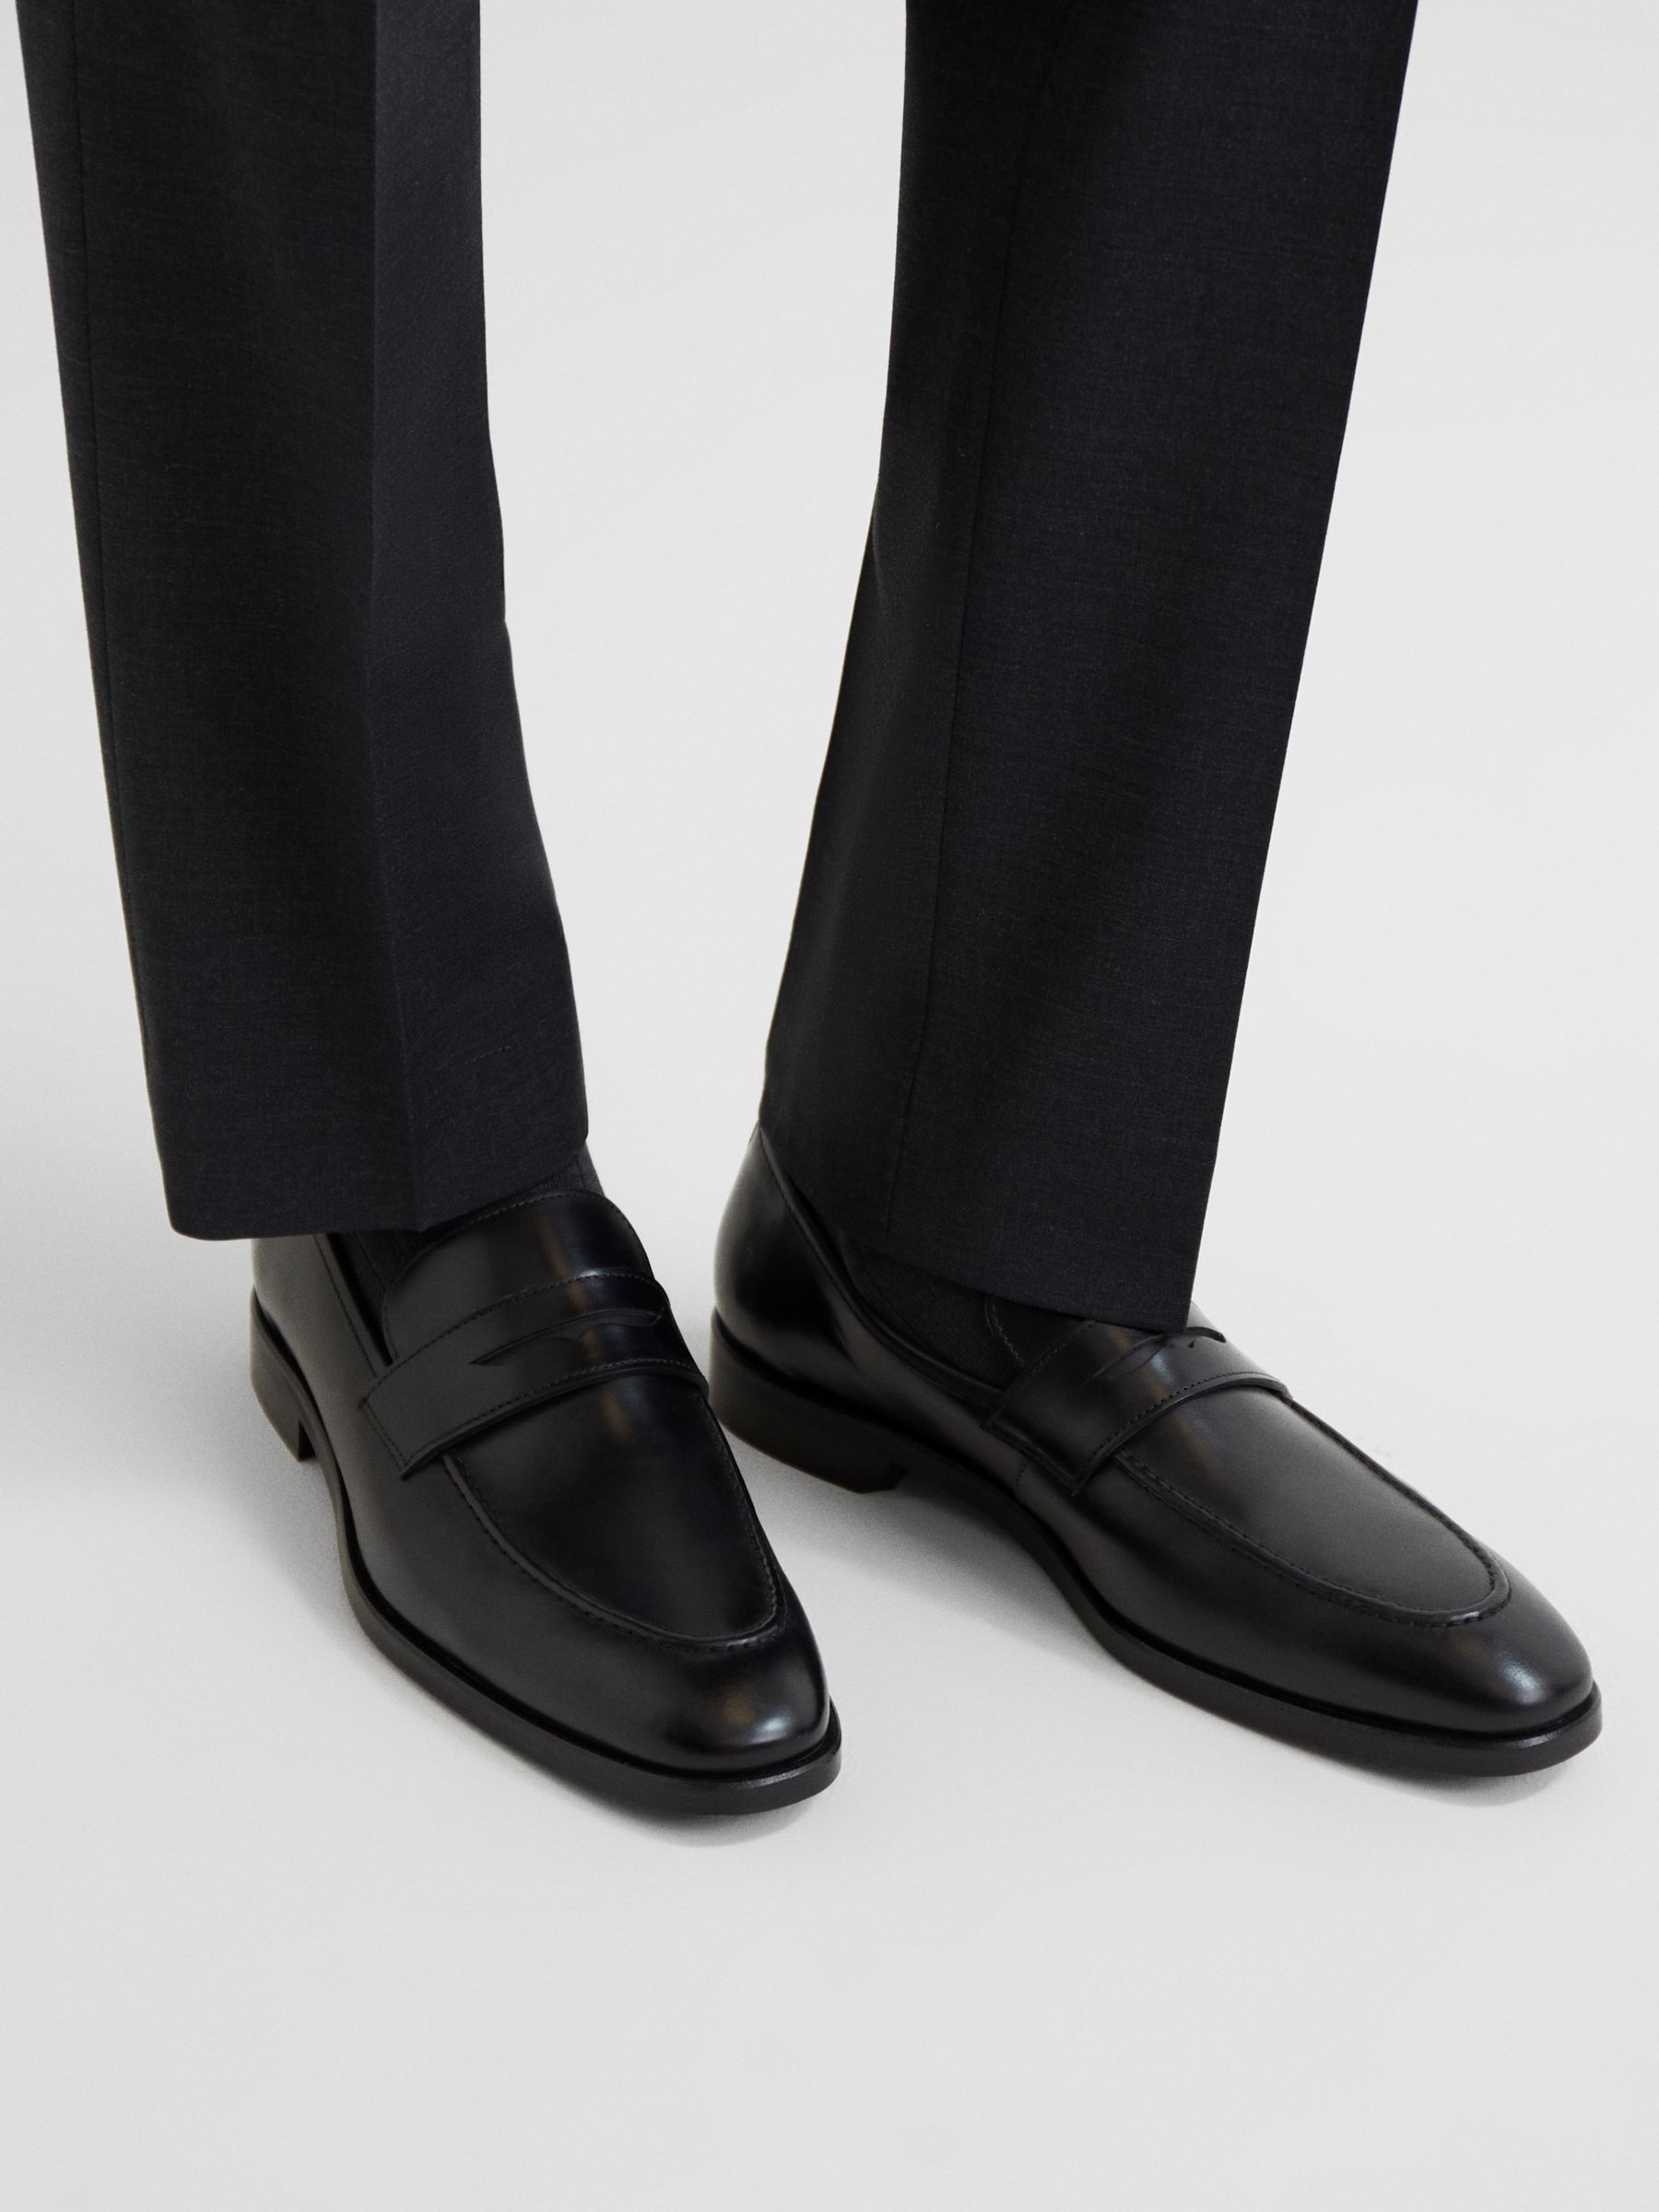 Reiss Grafton Leather Loafers, Black at John Lewis & Partners